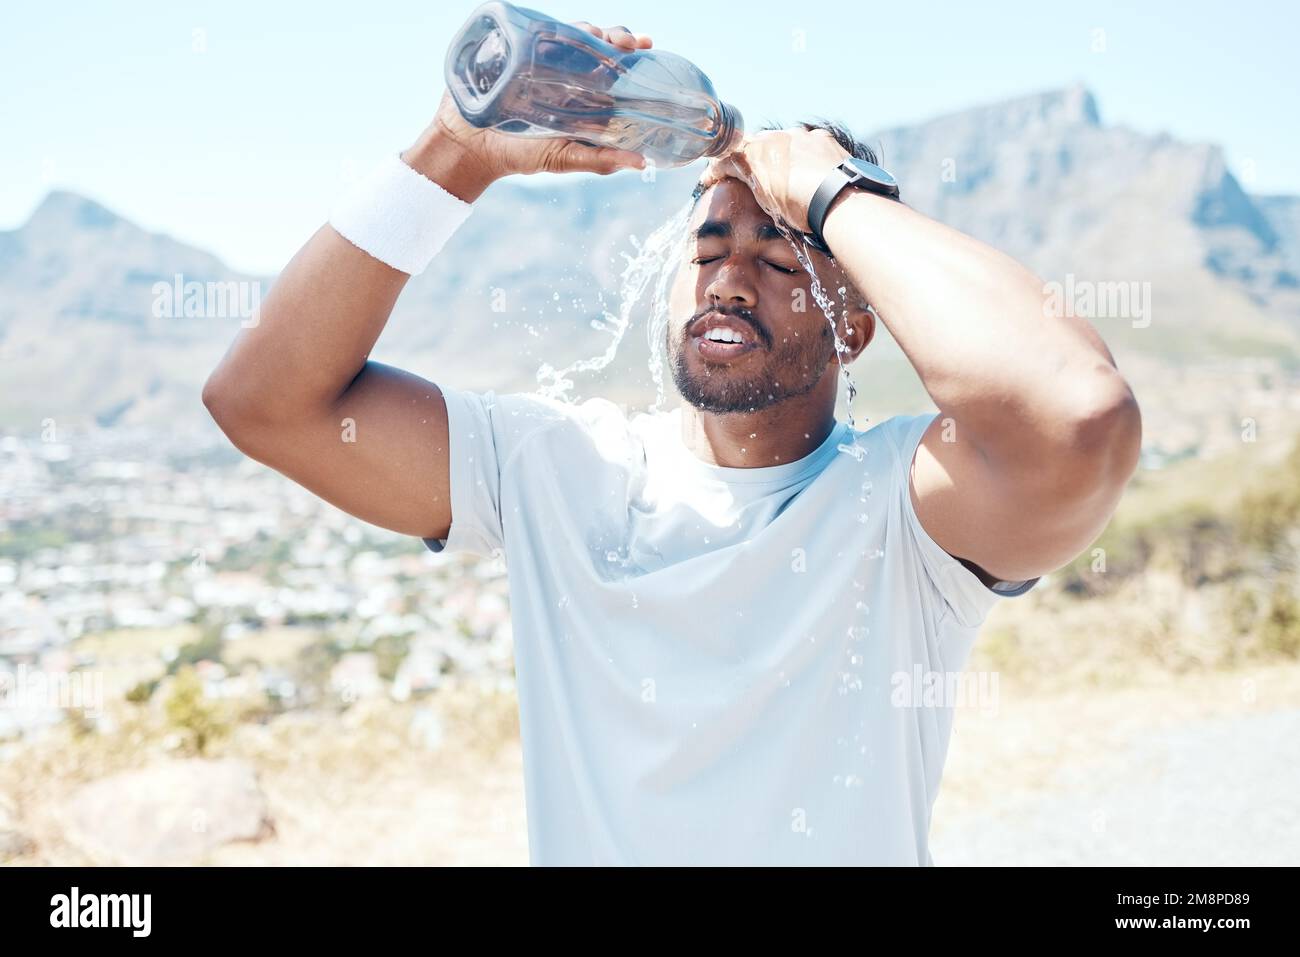 https://c8.alamy.com/comp/2M8PD89/closeup-of-a-handsome-young-man-standing-alone-and-pouring-water-on-his-face-after-a-run-outdoors-fit-indian-male-getting-hot-and-cooling-down-with-2M8PD89.jpg